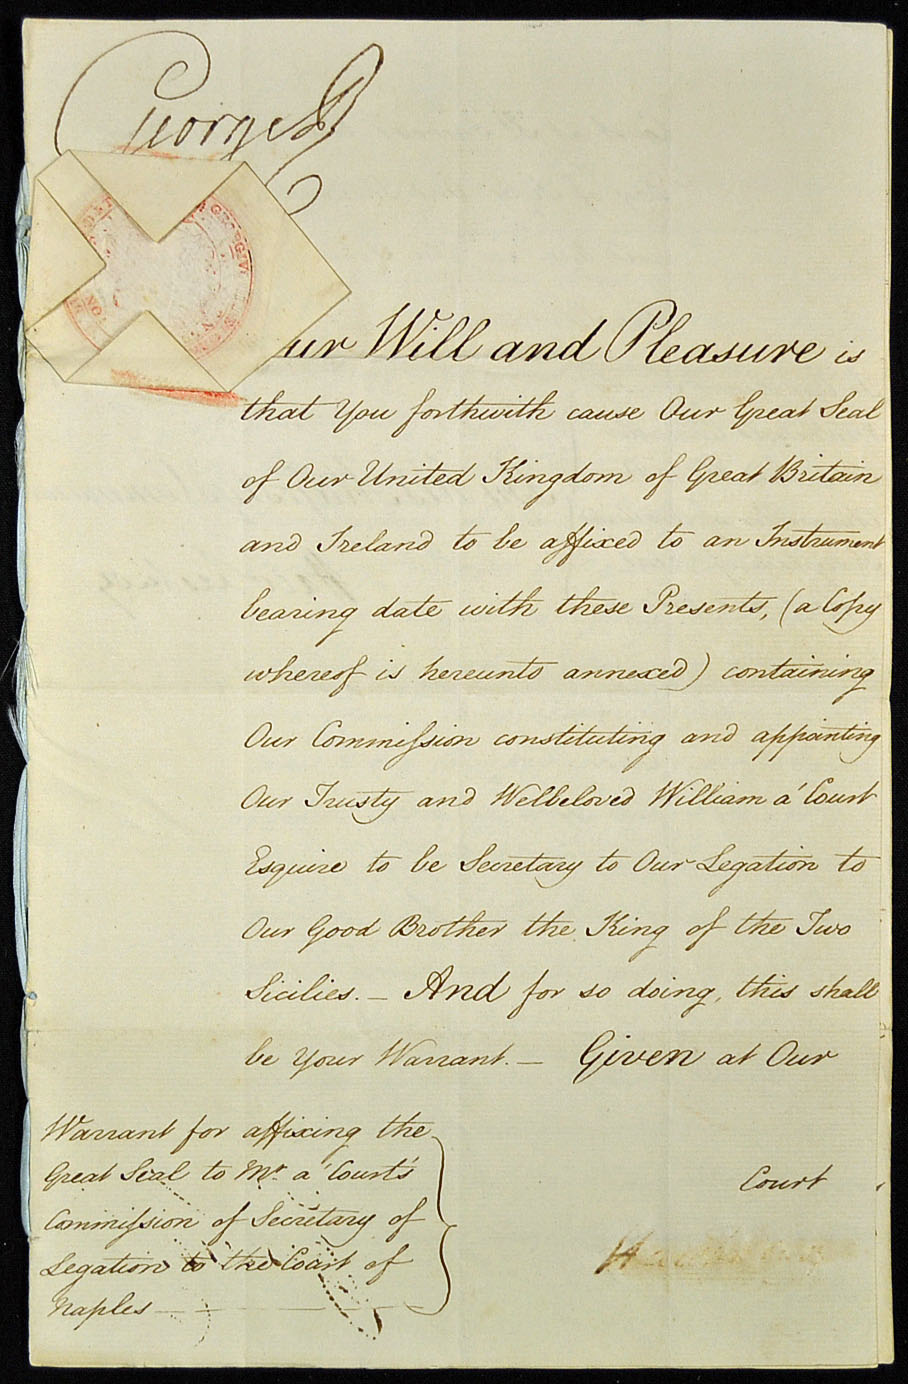 King George III 1801 Royal Warrant for the appointment of a legation secretary at Naples 'To our